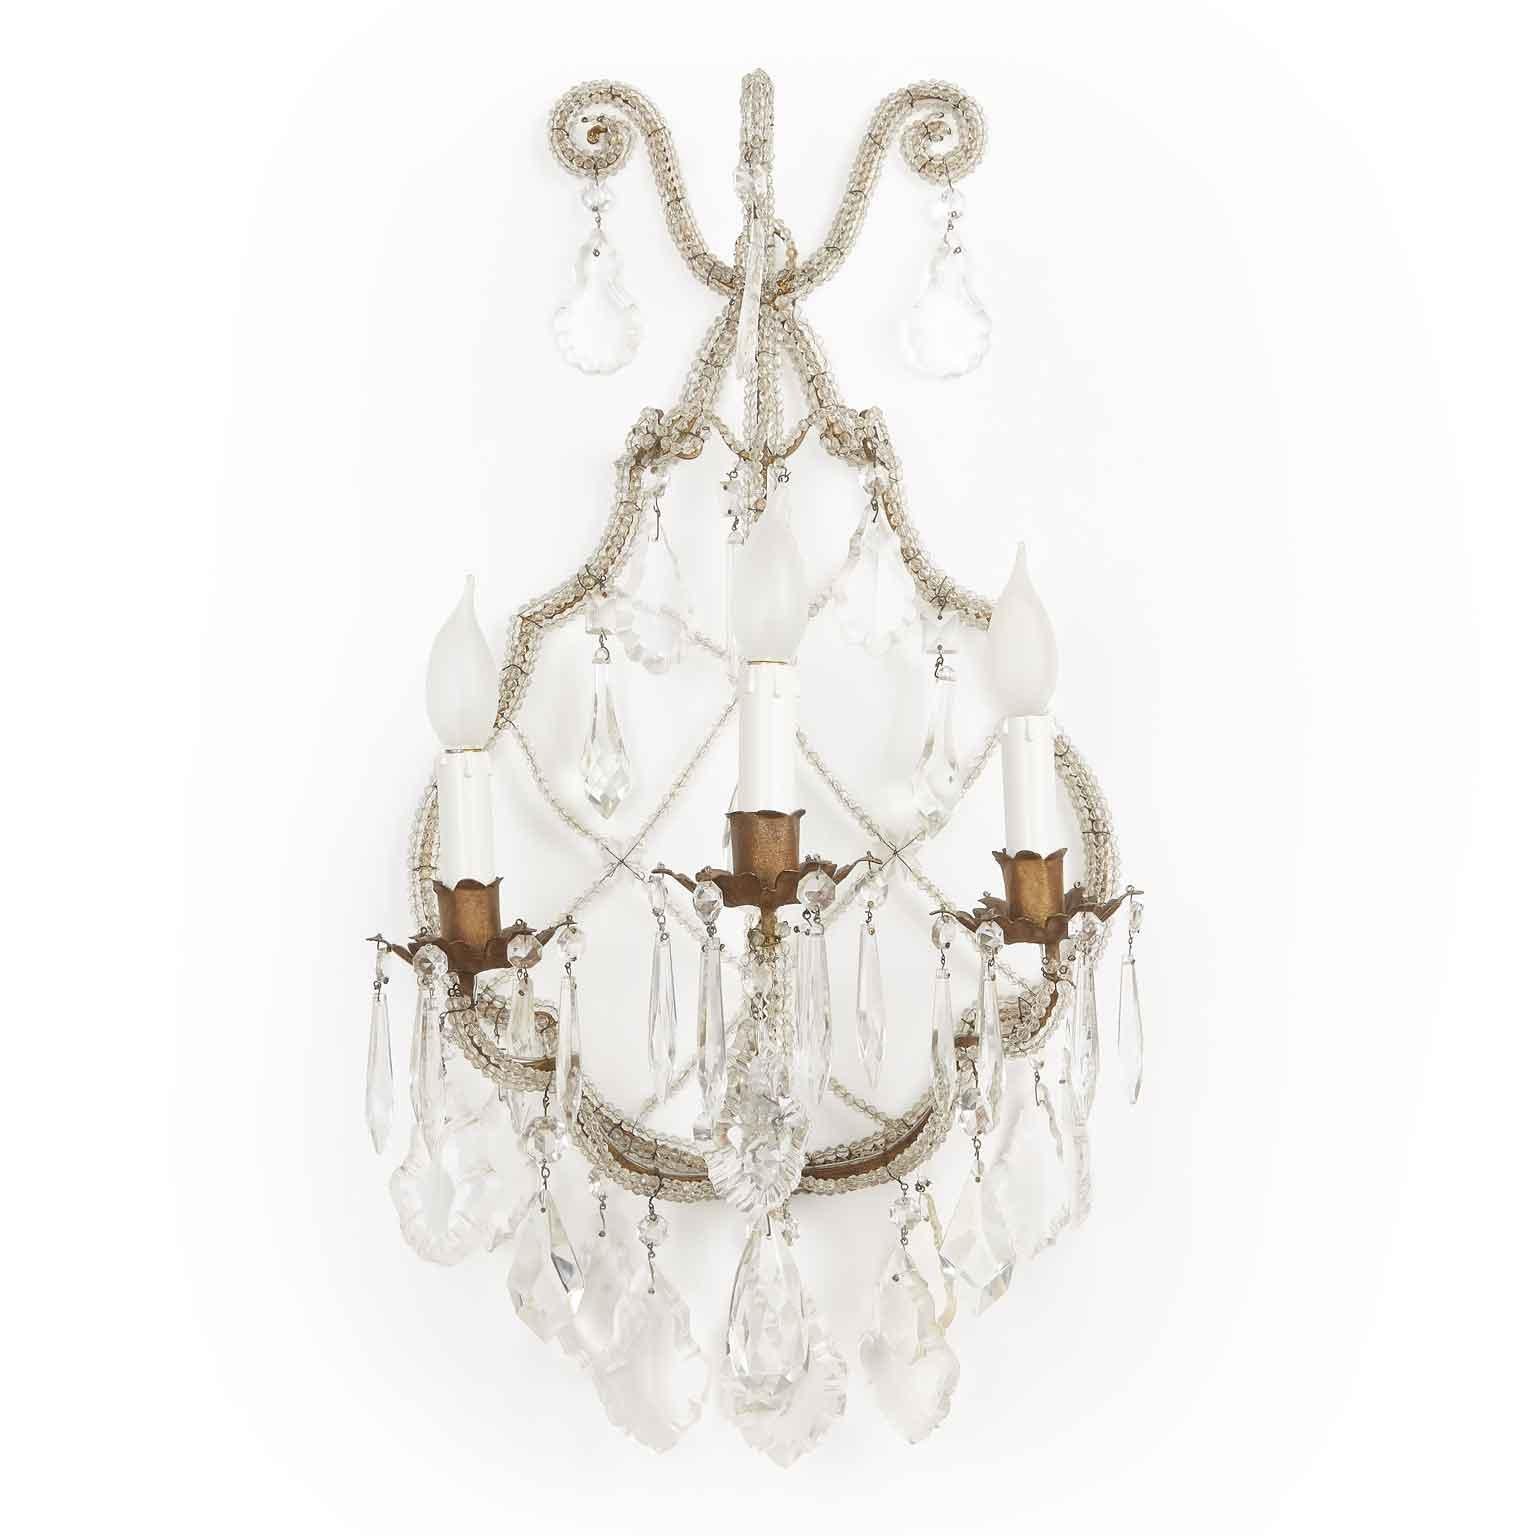 Charming pair of antique Italian beaded crystal sconces dating back to the late 19th century.
The square section brass frame, still showing gilding traces, is entirely covered with three rows of beads and embellished by an original woven net of